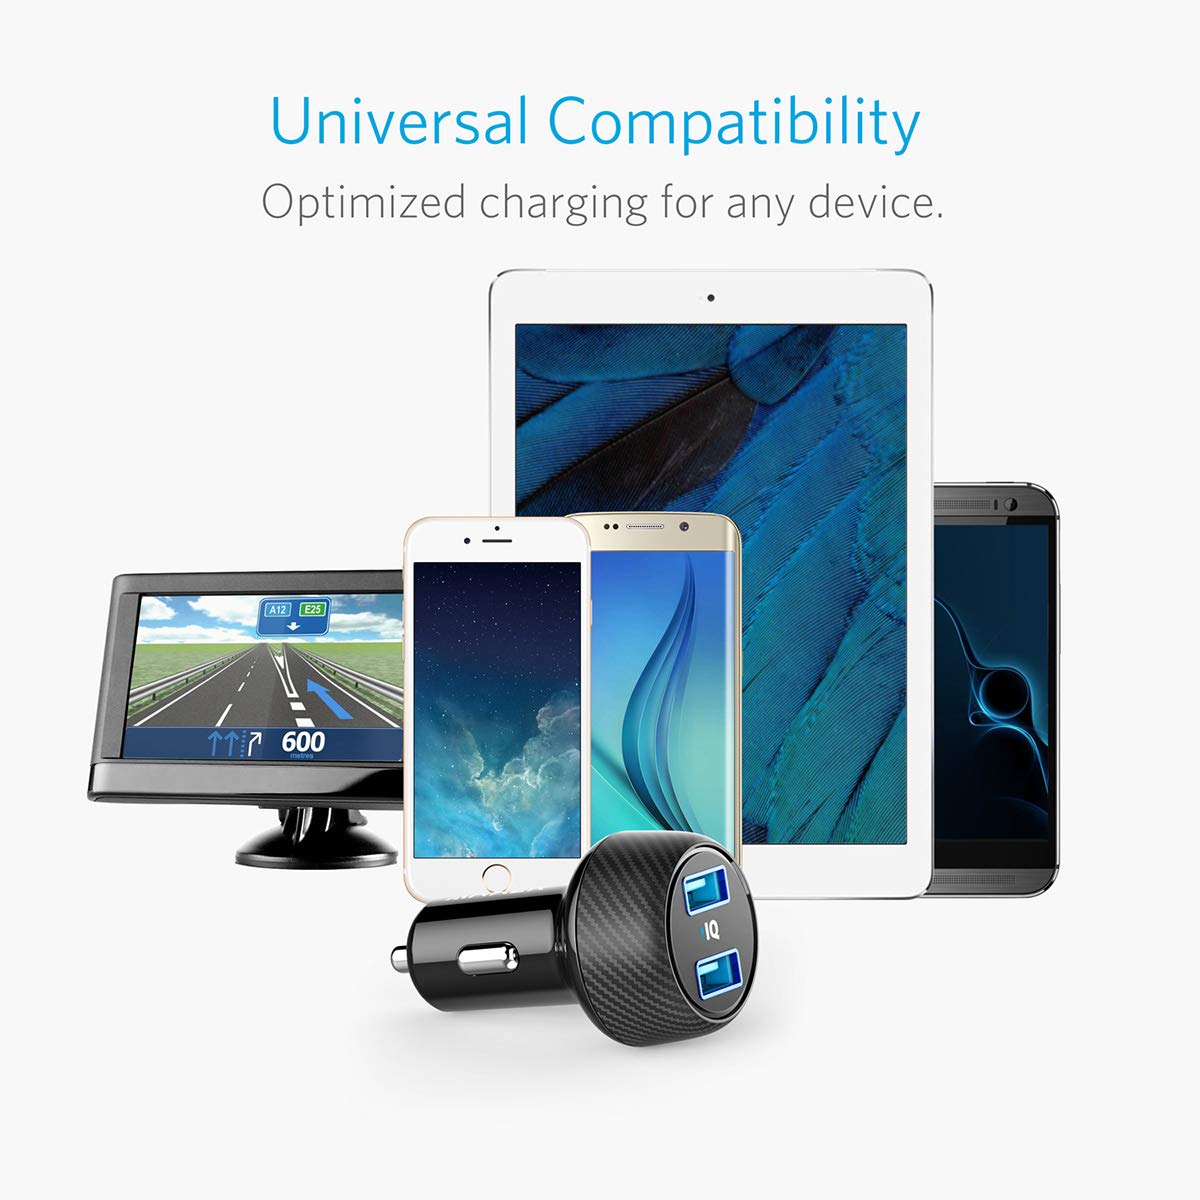 Anker 24W 4.8A Car Charger, 2-Port Ultra-Compact PowerDrive 2 Elite with PowerIQ Technology and LED for iPhone XS/Max/XR/X/8/7/6/Plus, iPad Pro/Air/Mini, Galaxy Note/S Series, LG, Nexus, HTC, and More